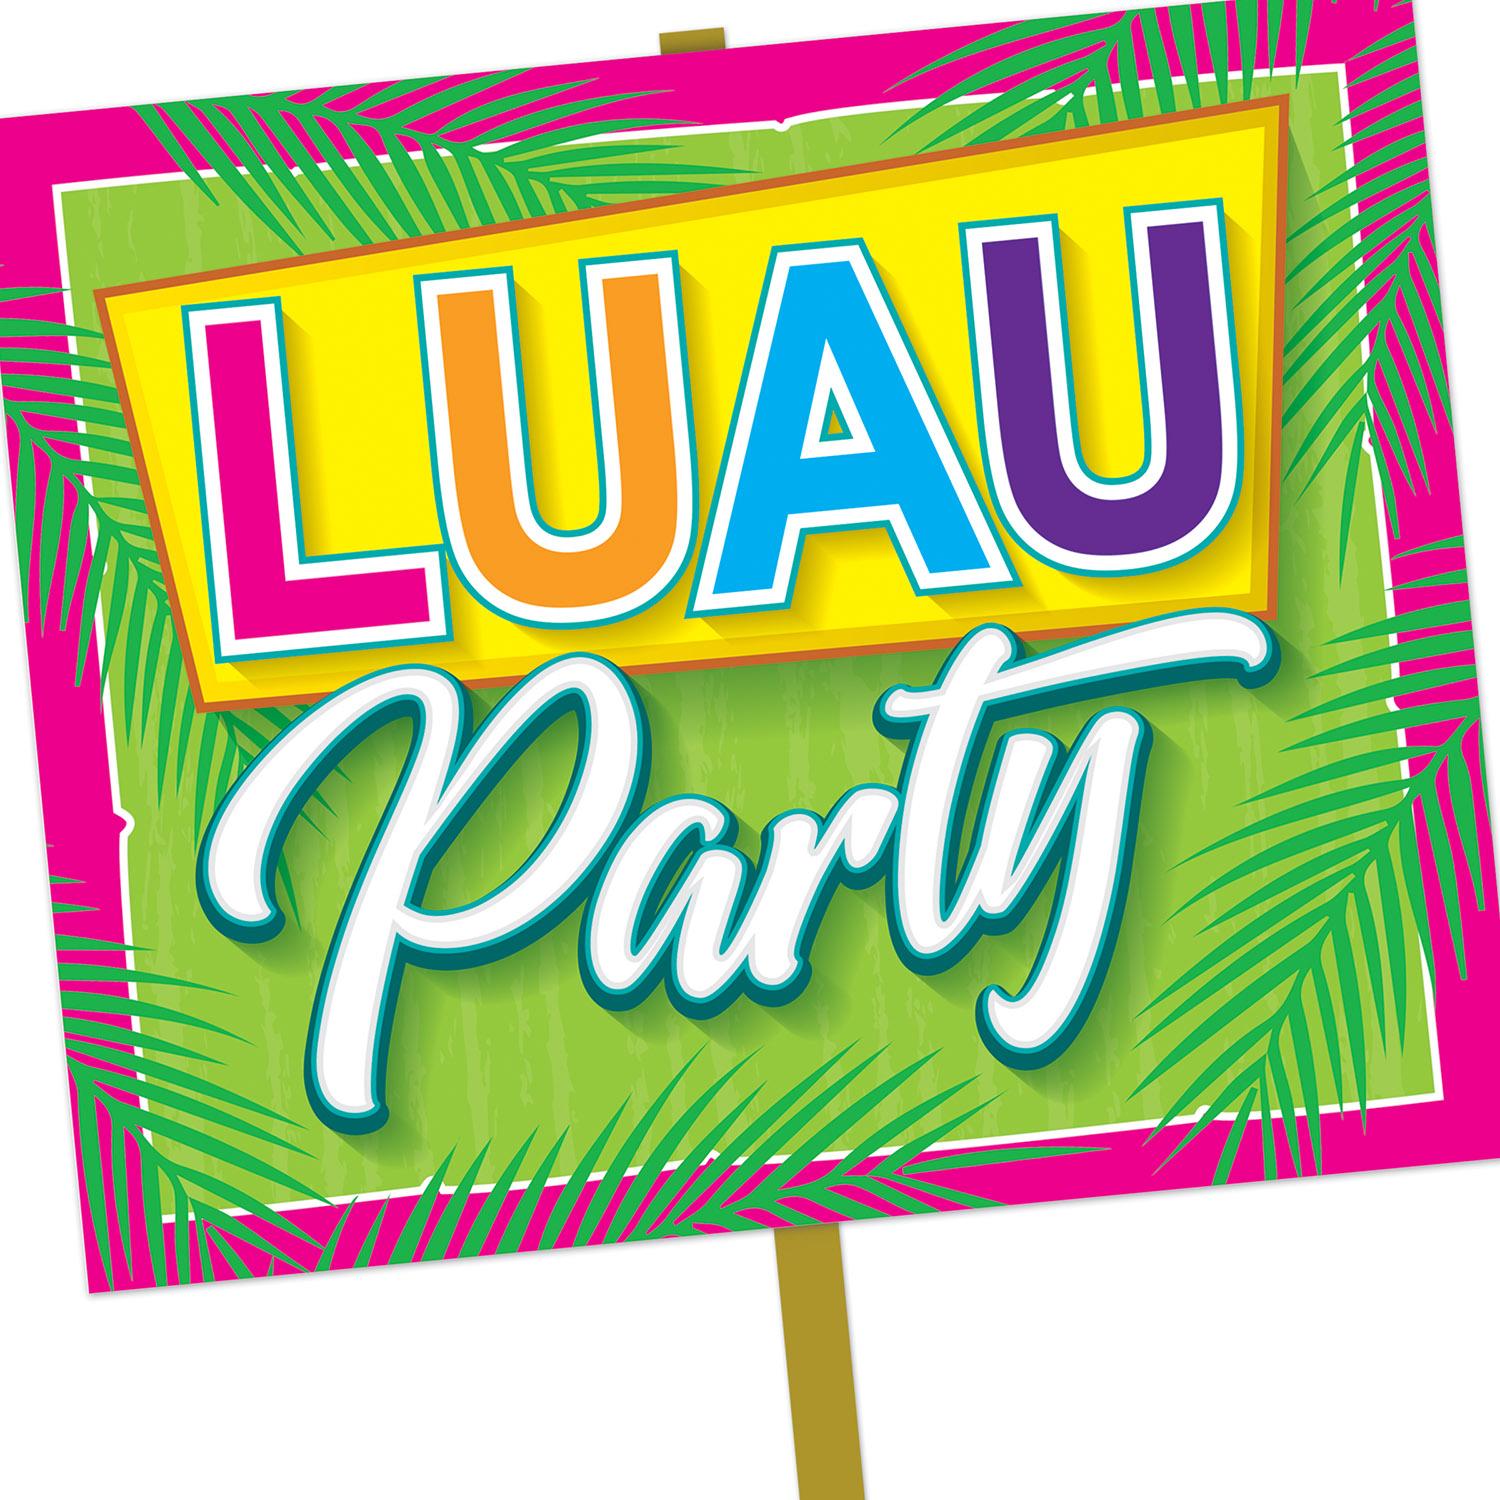 Beistle Luau Party Yard Sign